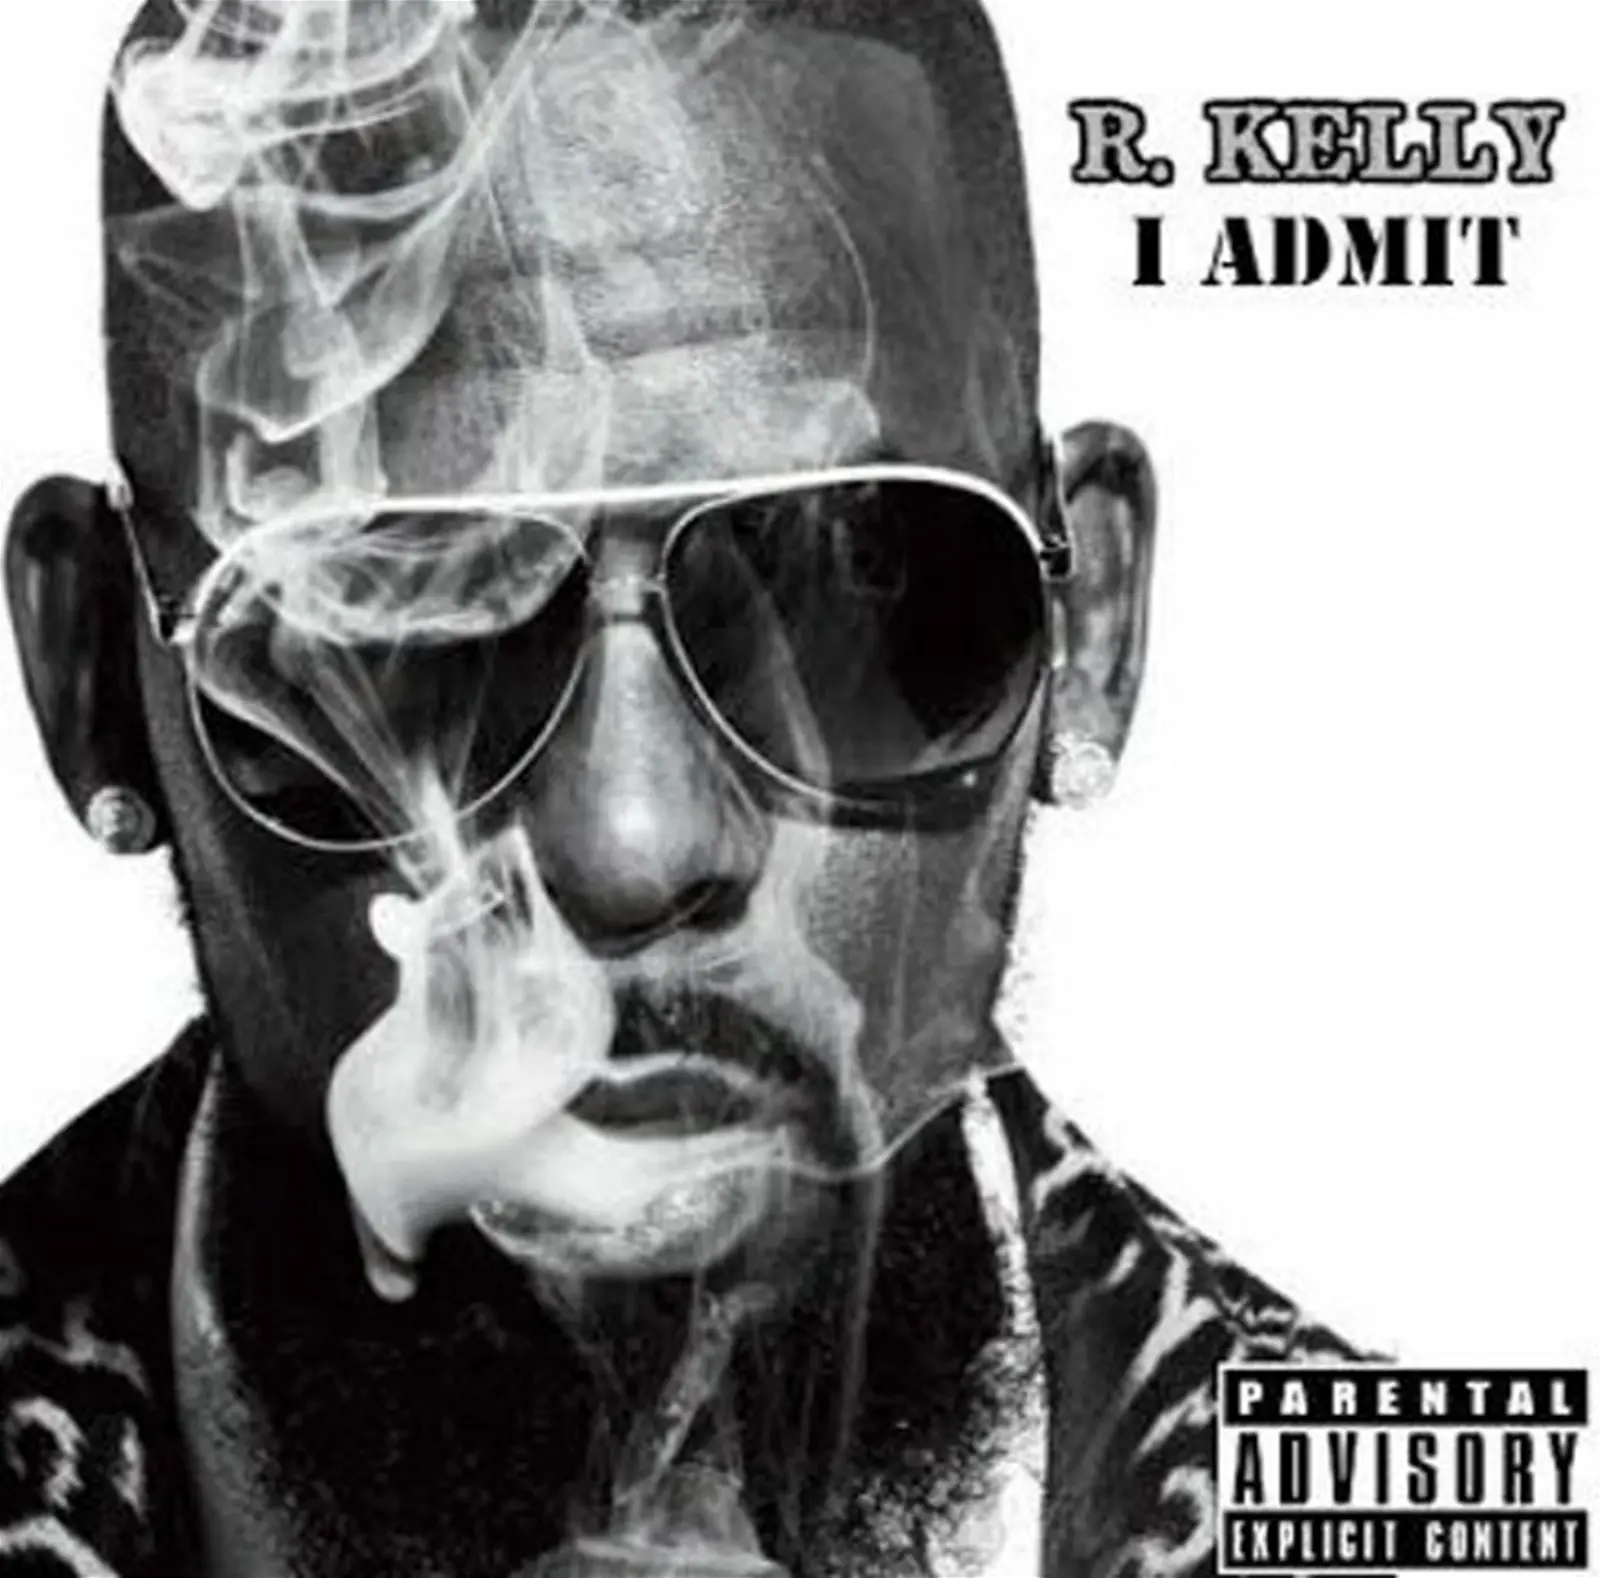 R. Kelly’s new album, ‘I Admit,’ drops at Apple music, Spotify